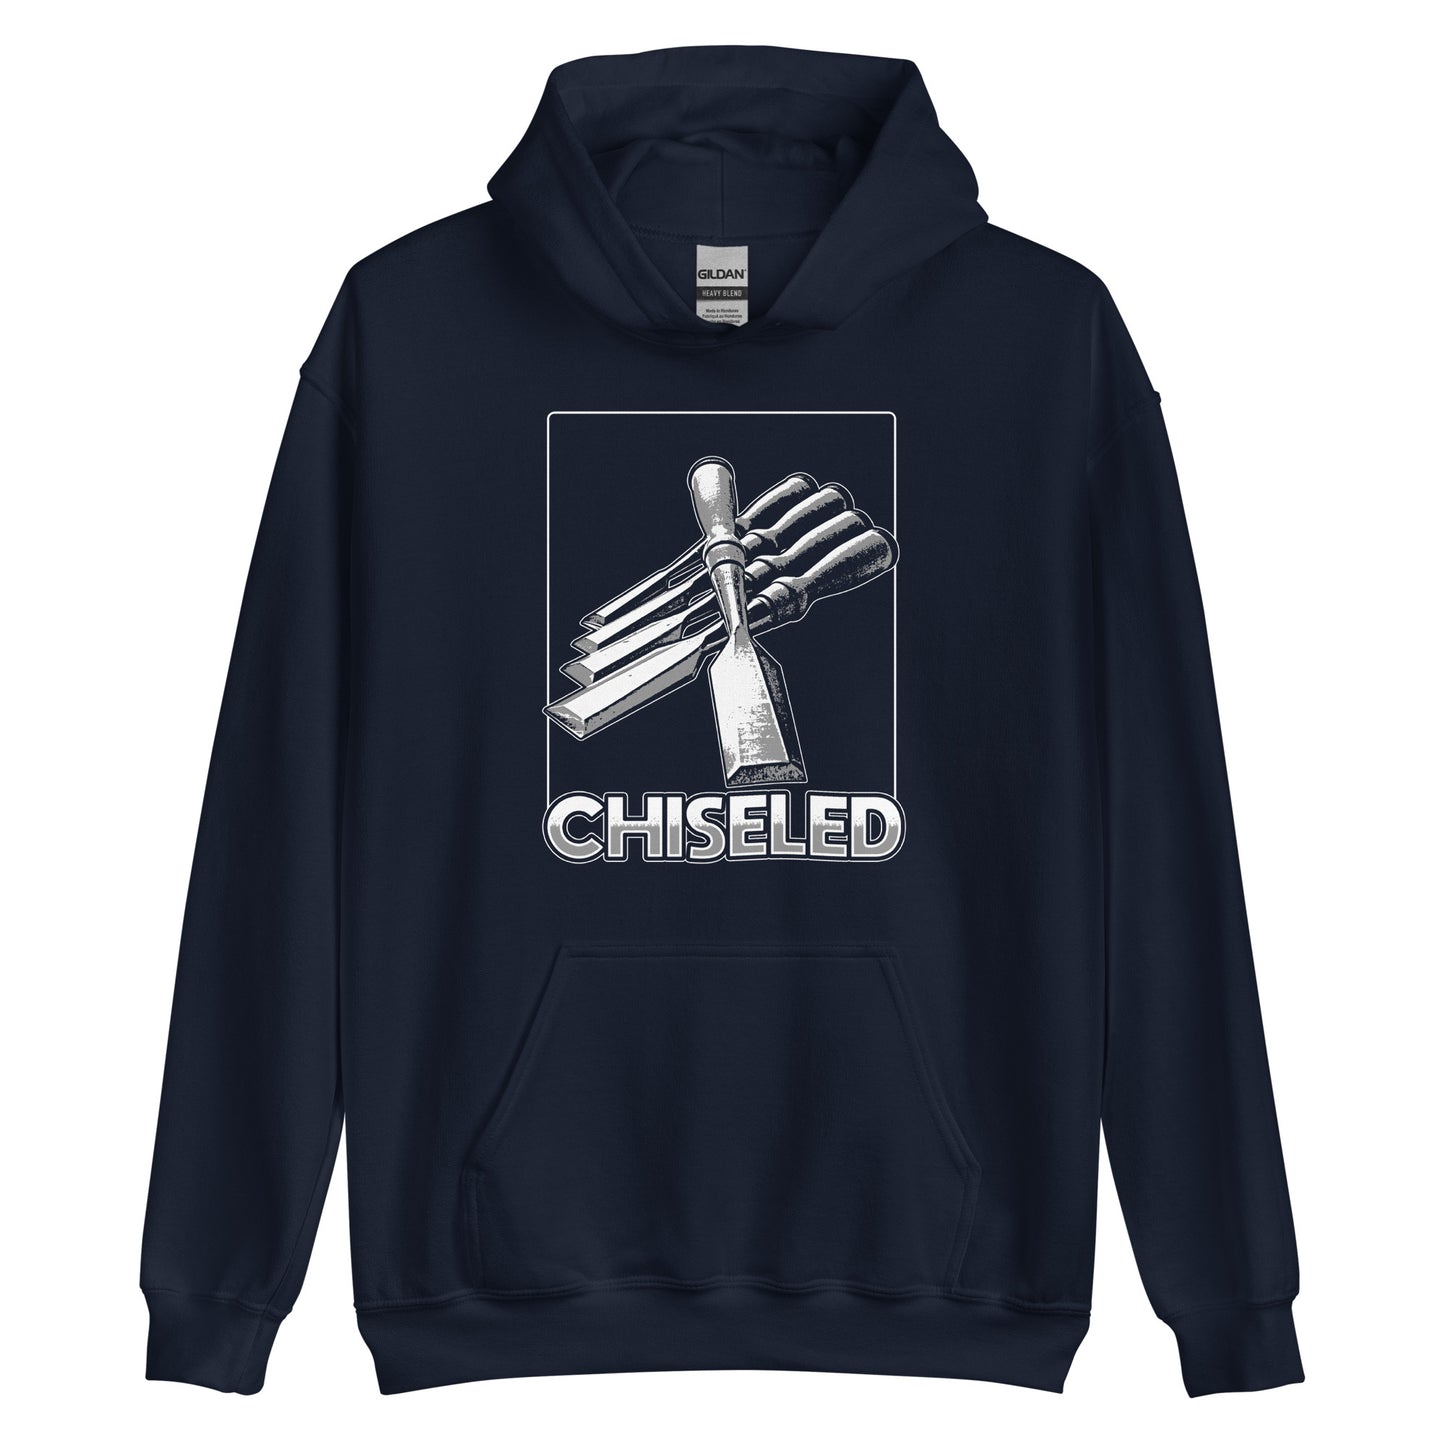 "Chiseled" Unisex Hoodie for Woodworkers (Multiple Colors)